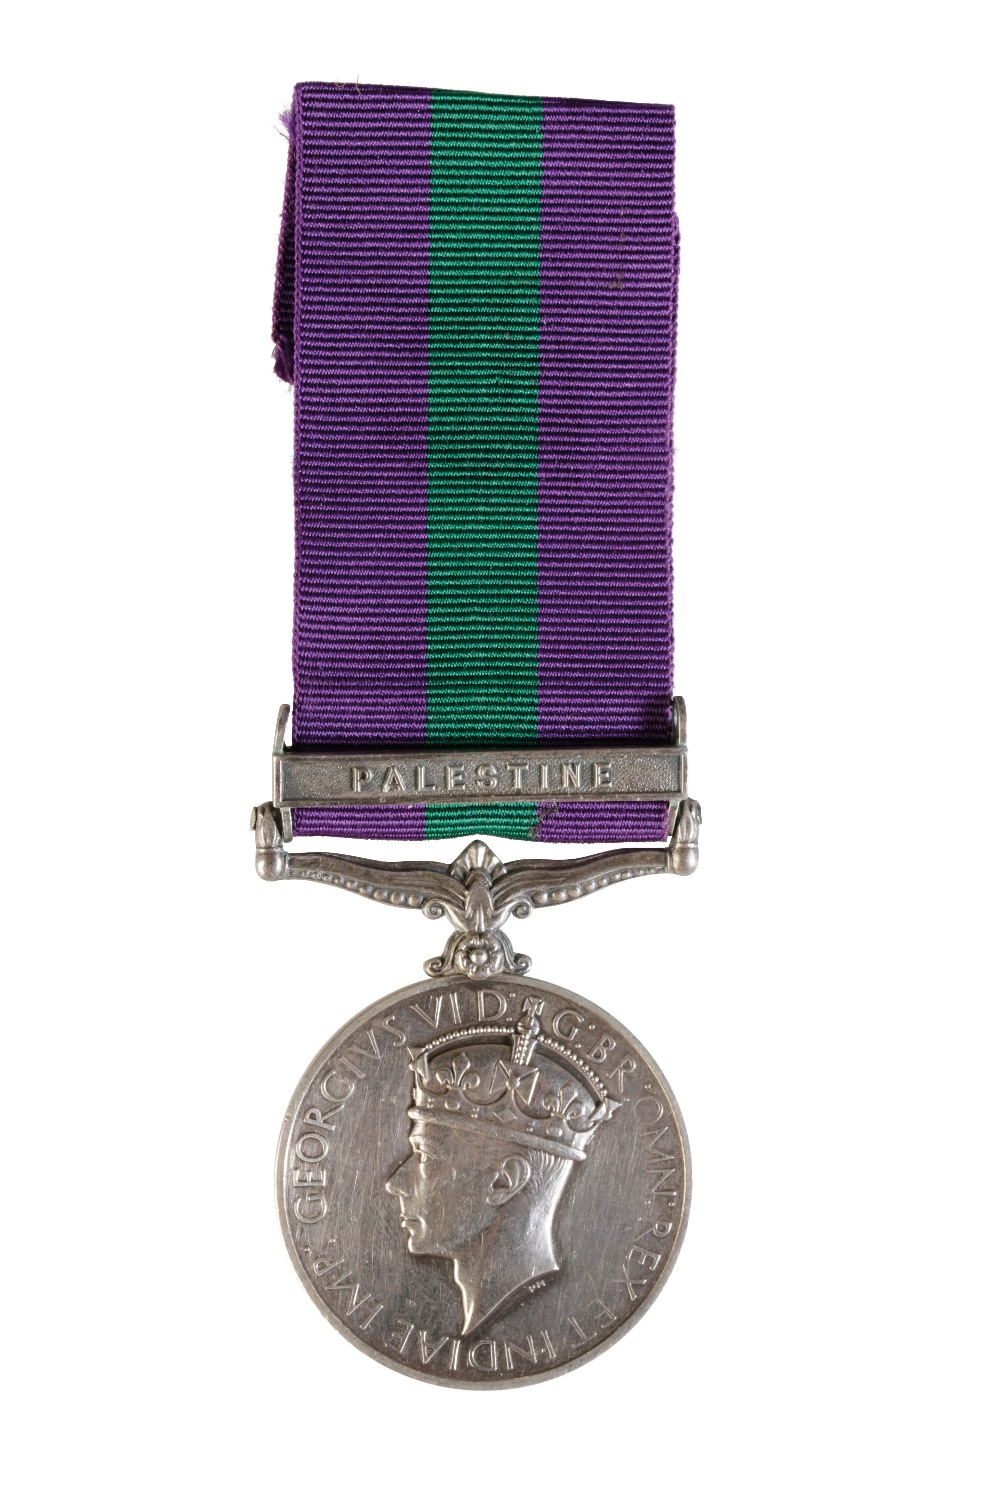 GENERAL SERVICE MEDAL clasp Palestine 4538246 Pte. C. Burrows